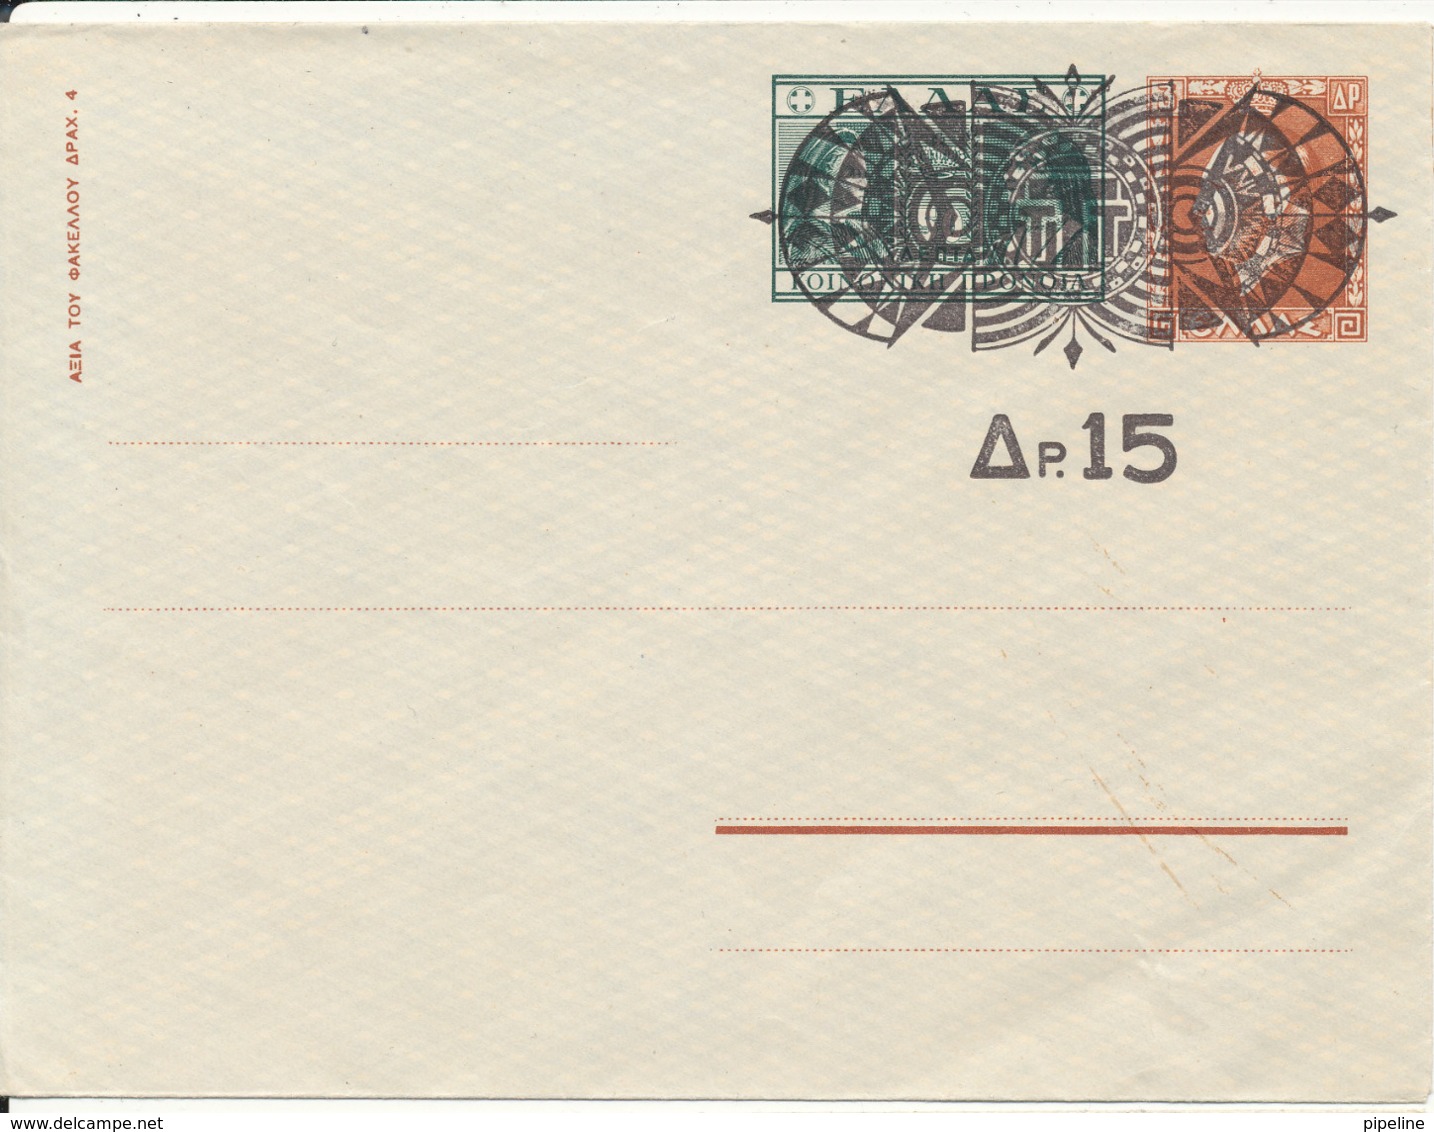 Greece Postal Stationery Overprinted Cover In Mint Condition - Postal Stationery